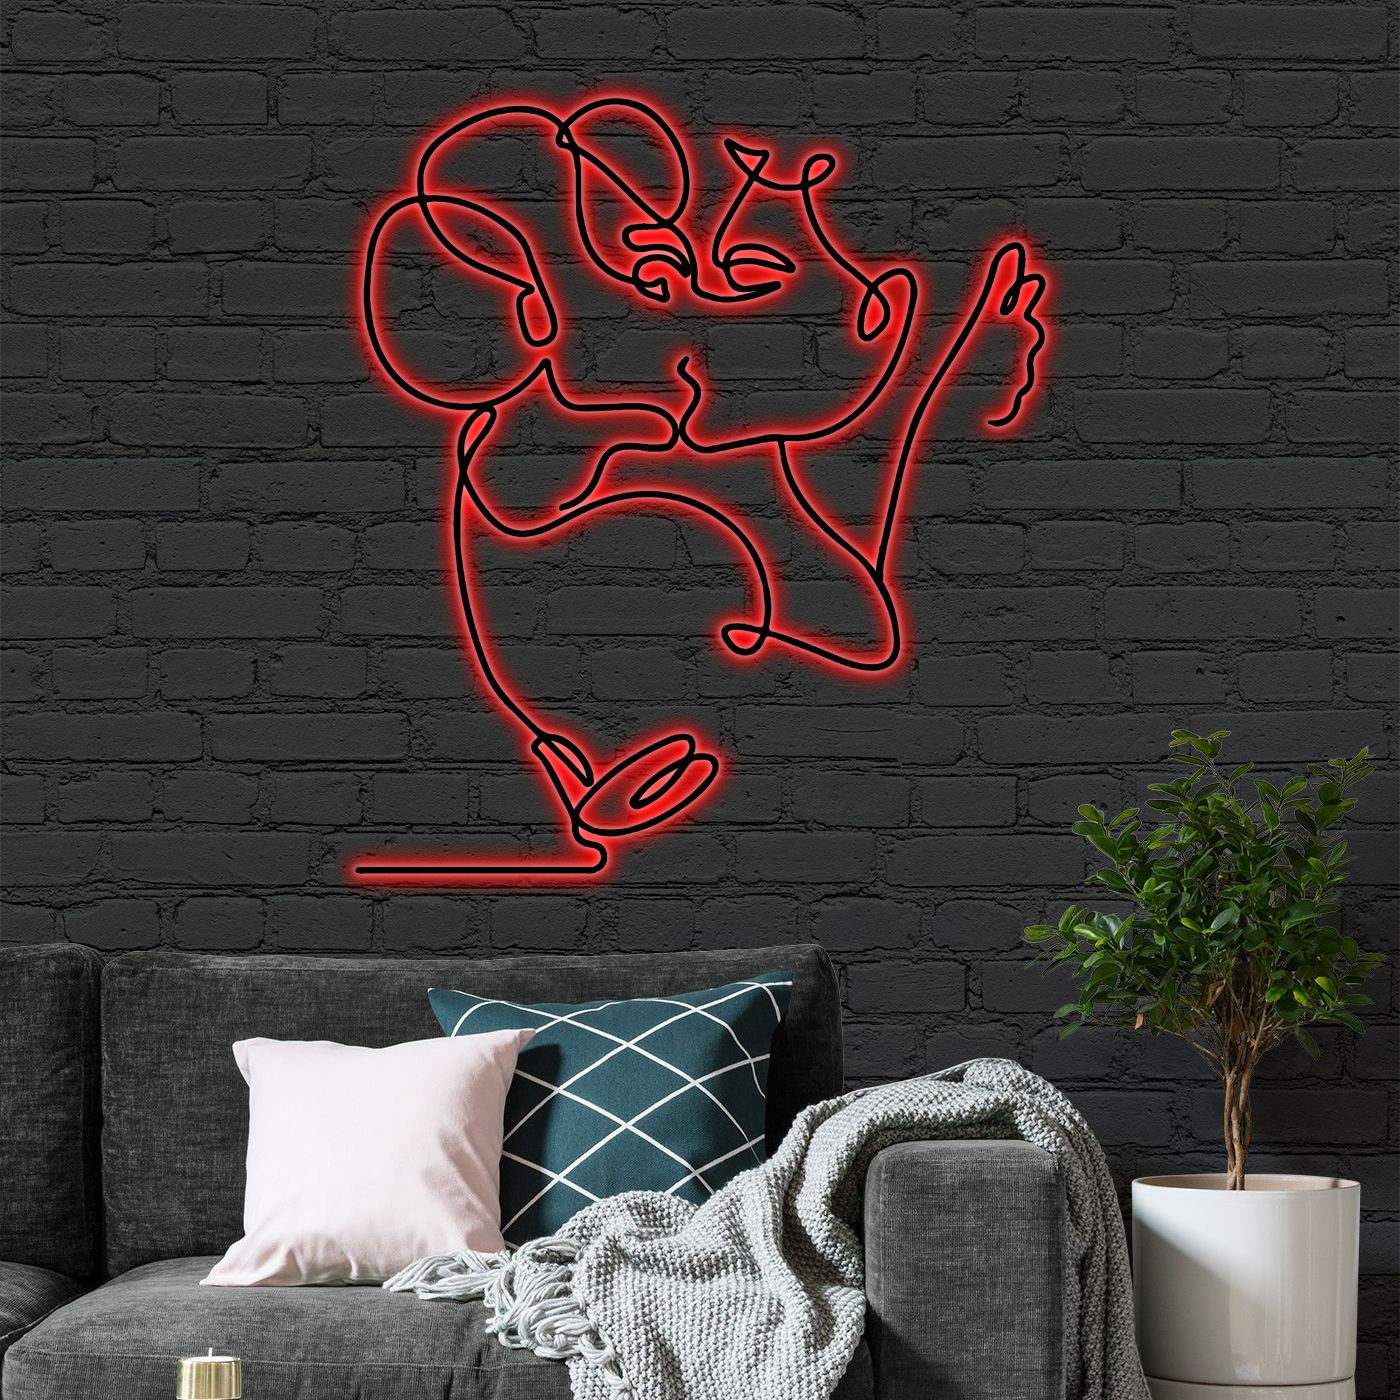 PresentsPrints One Line Drawing Couple RGB Led Lights Metal Wall Art, Valentine Gift